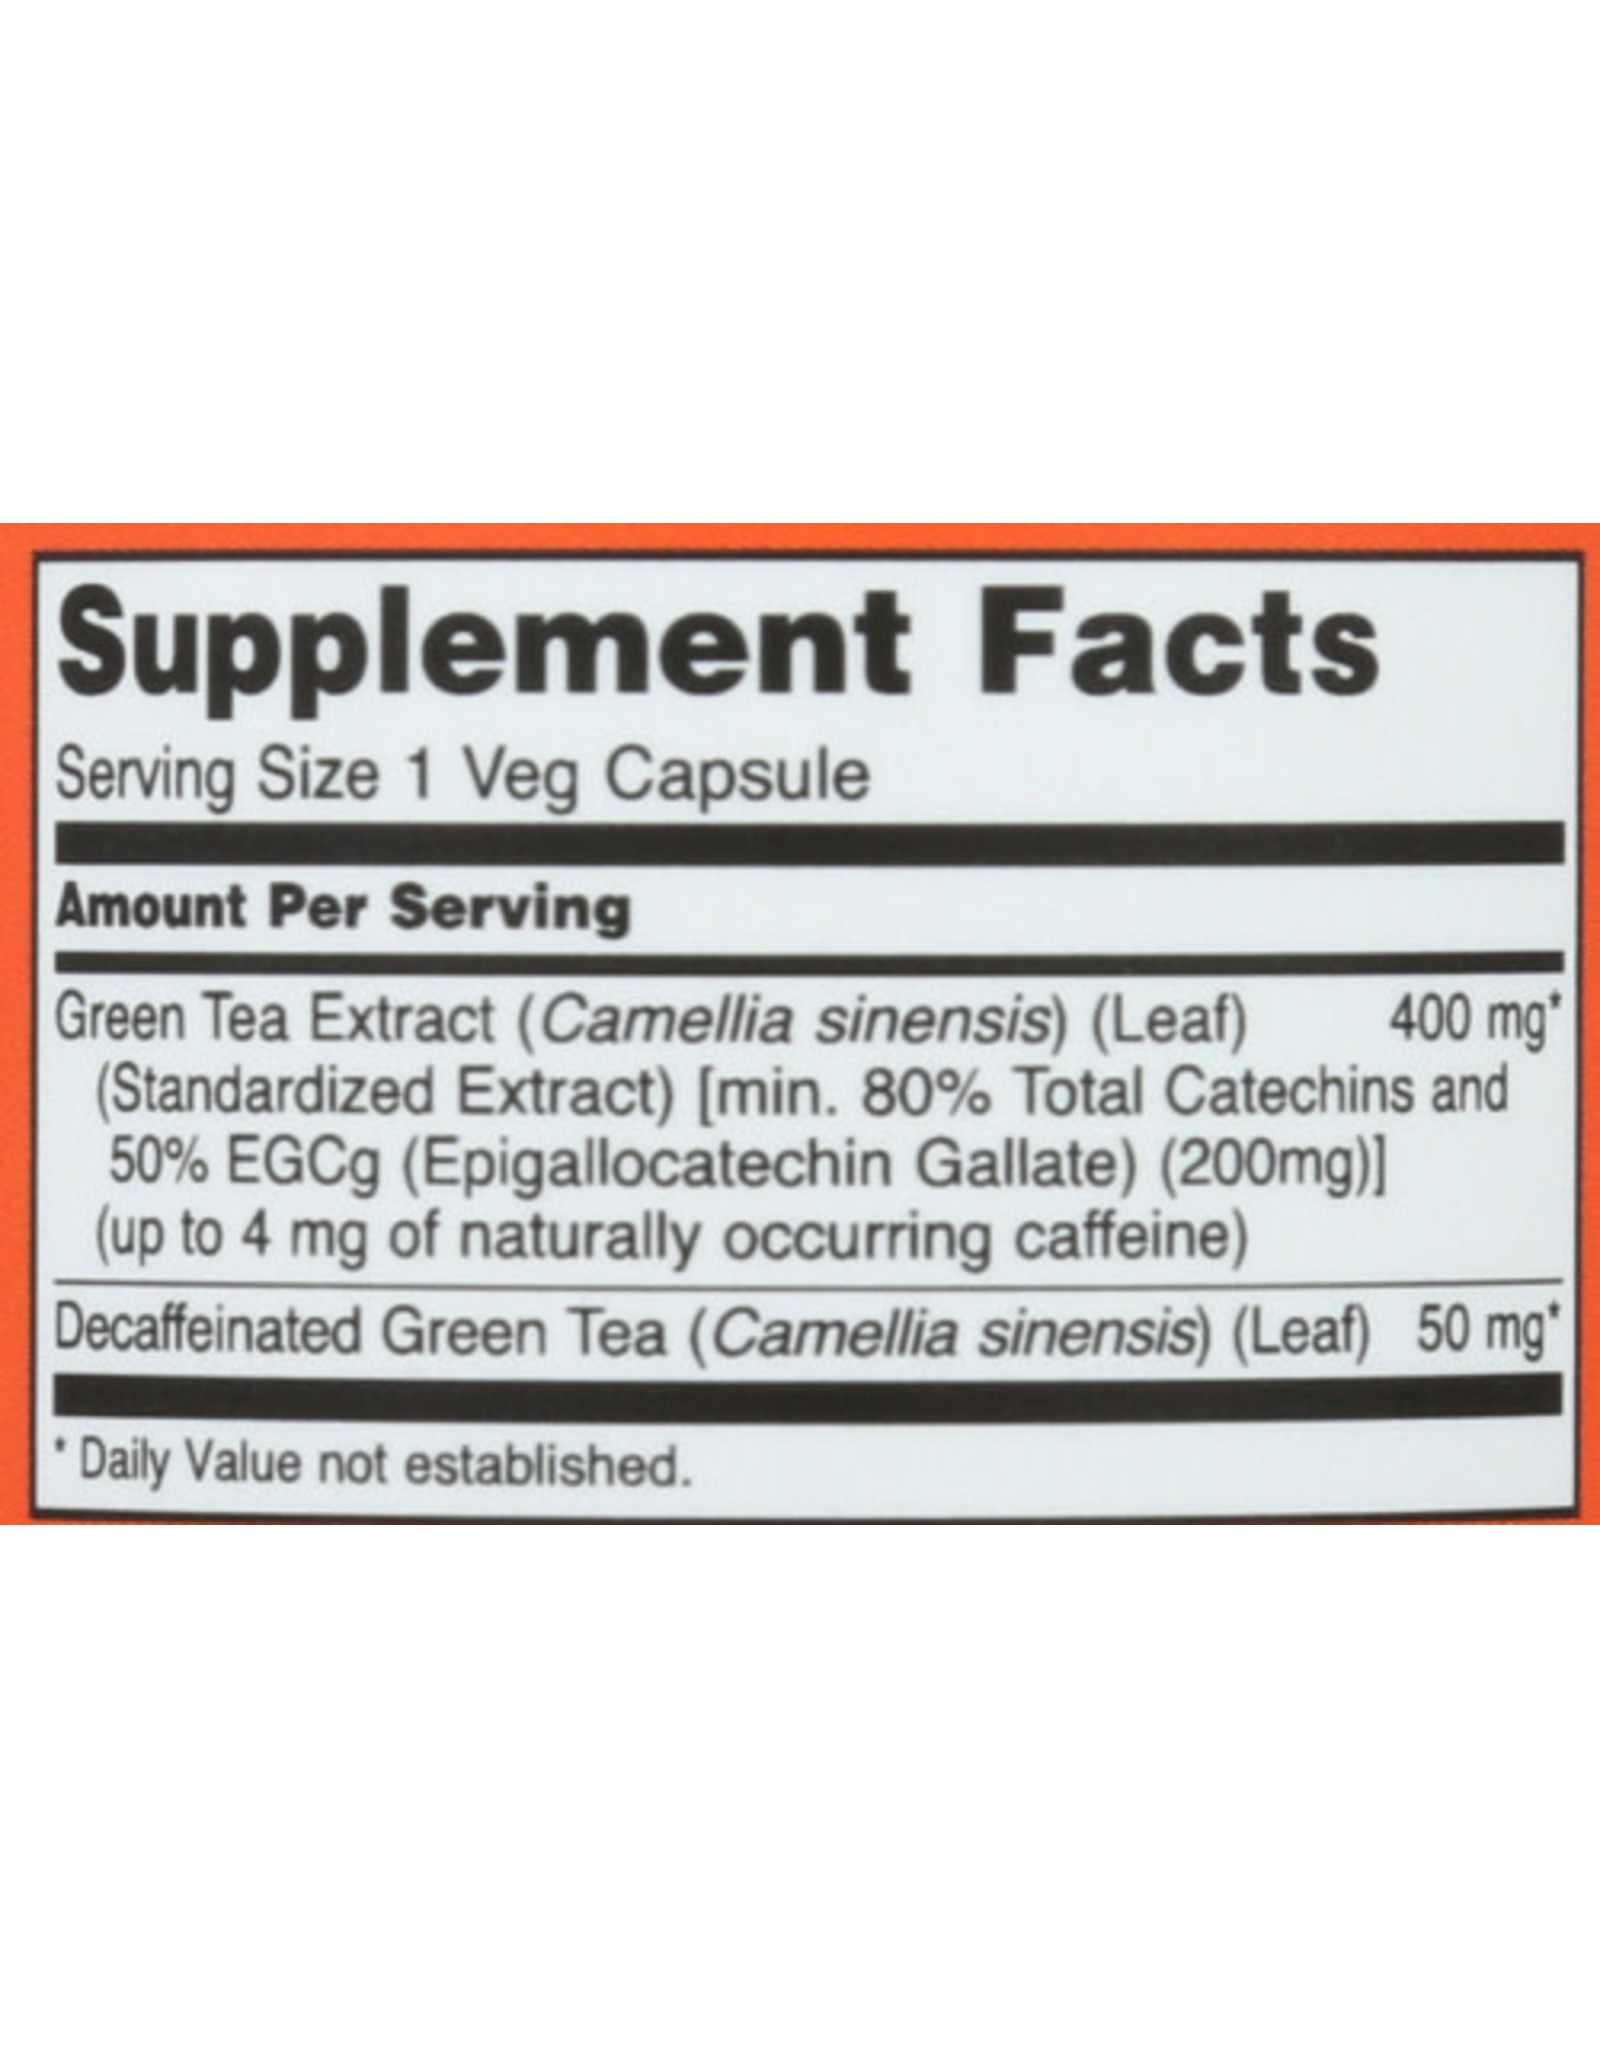 NOW® NOW FOODS EGCG GREEN TEA EXTRACT 400 MG., 90 CAPSULES